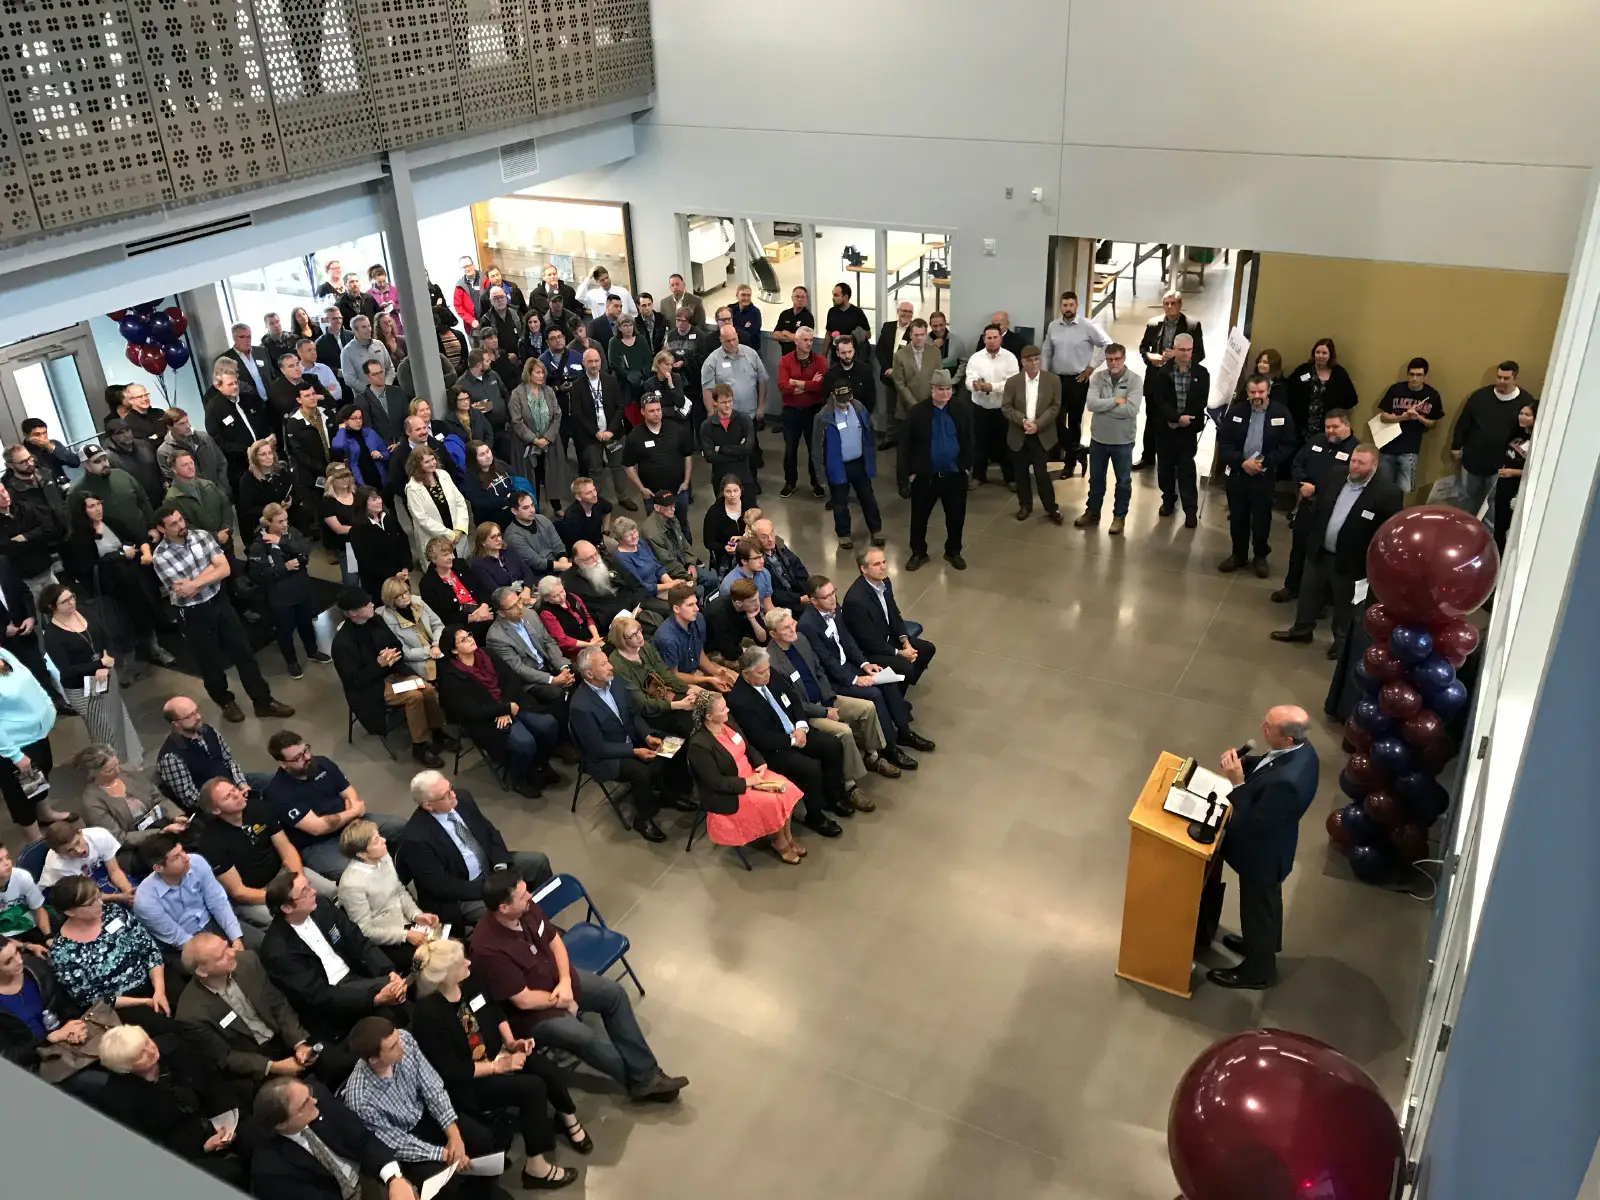 The grand opening of the Industrial Technology Center with a large audience and speakers